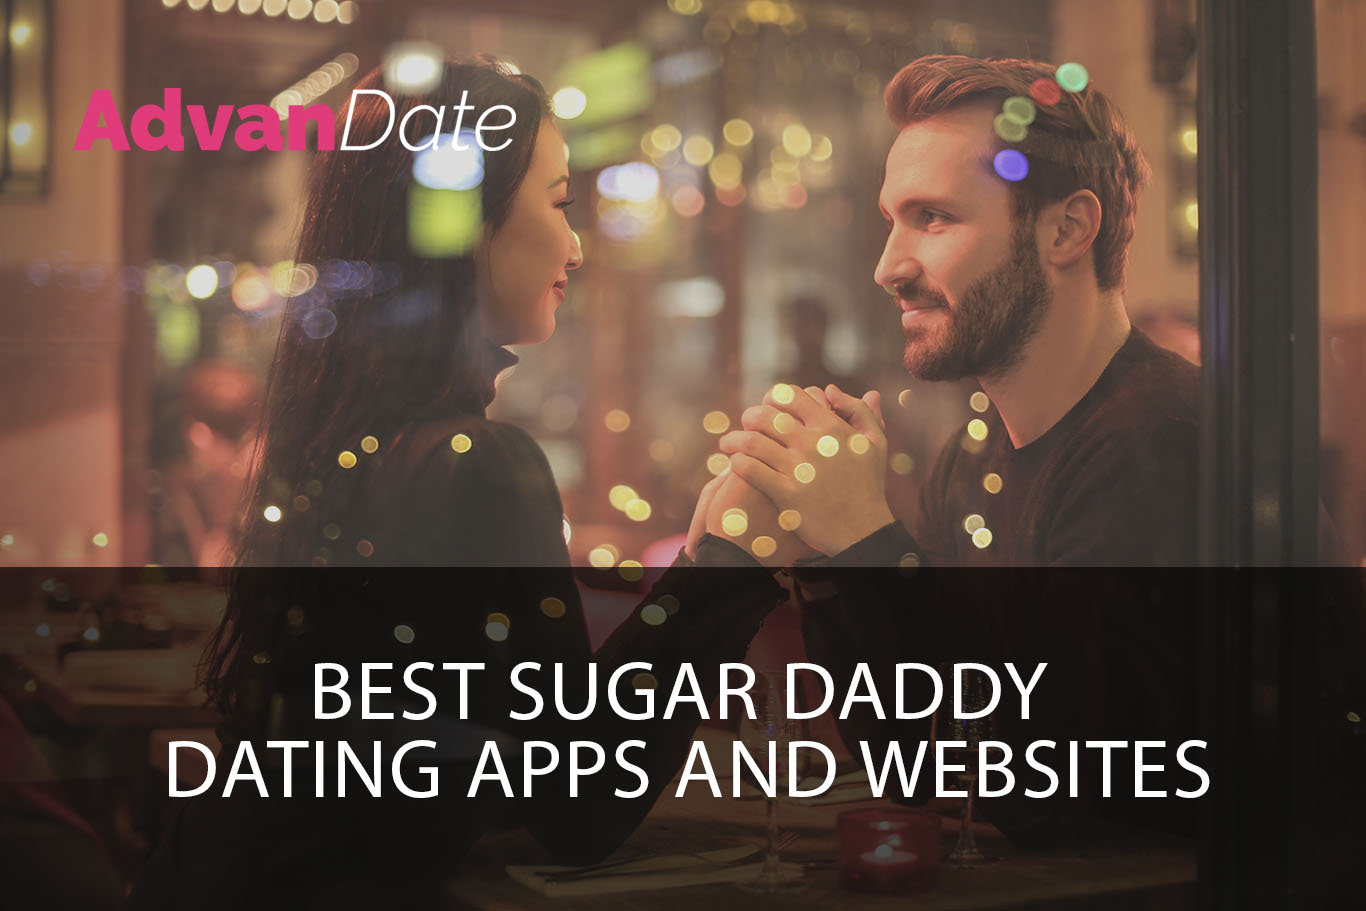 Best Sugar daddy dating apps and websites